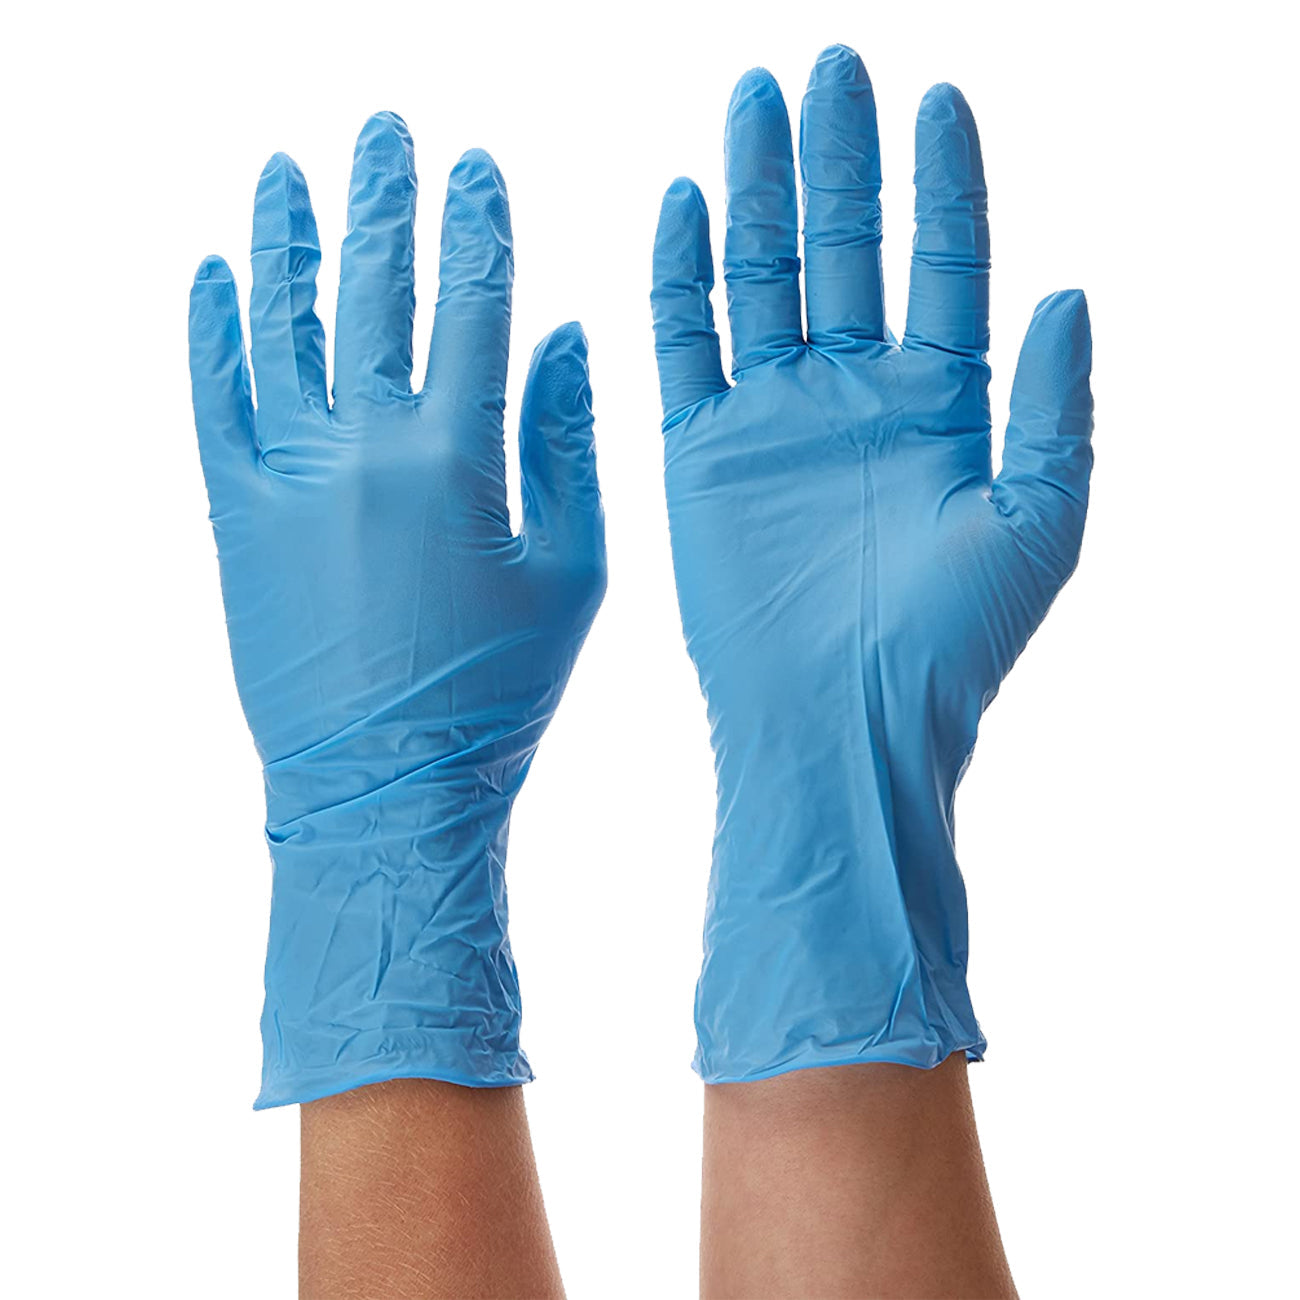 100 CT Everyday Use Powder Free Disposable Extra Thick Nitrile Gloves